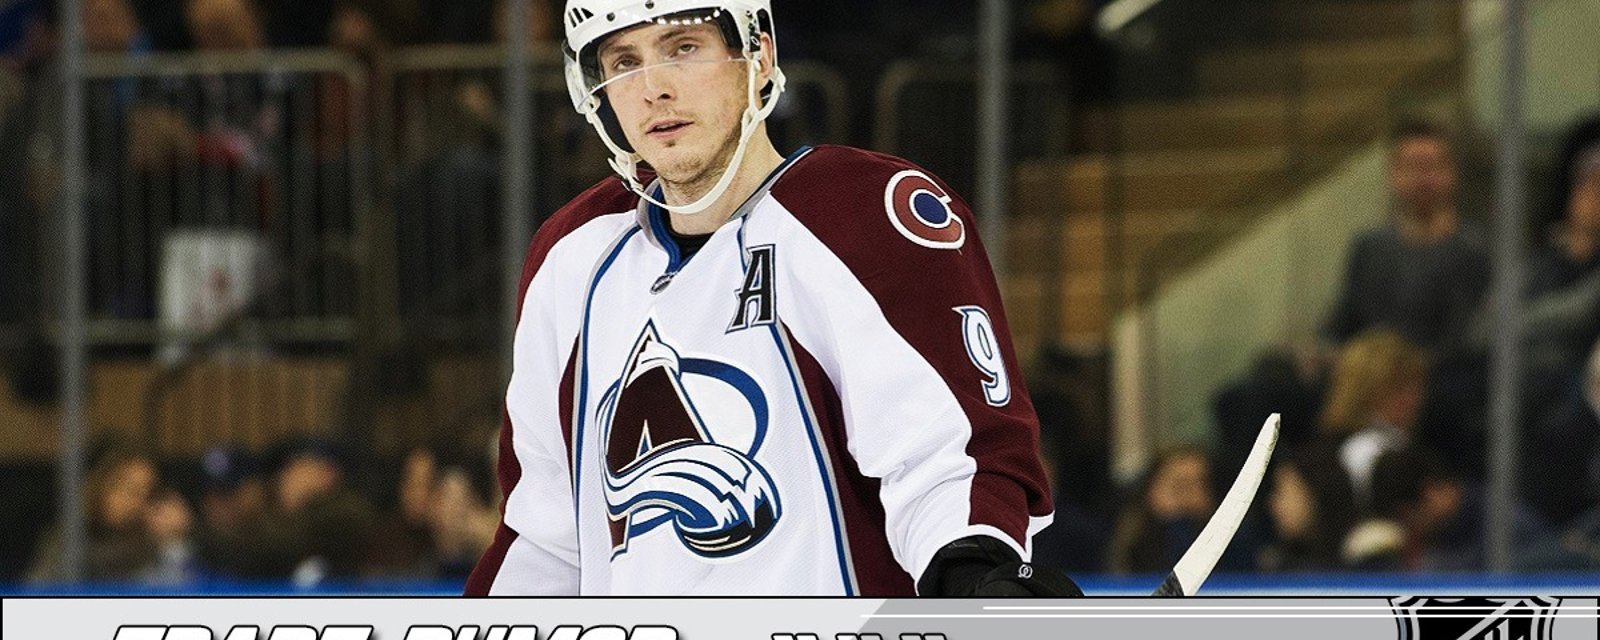 Trade rumors around Duchene heating up, could be on a new team before next season.